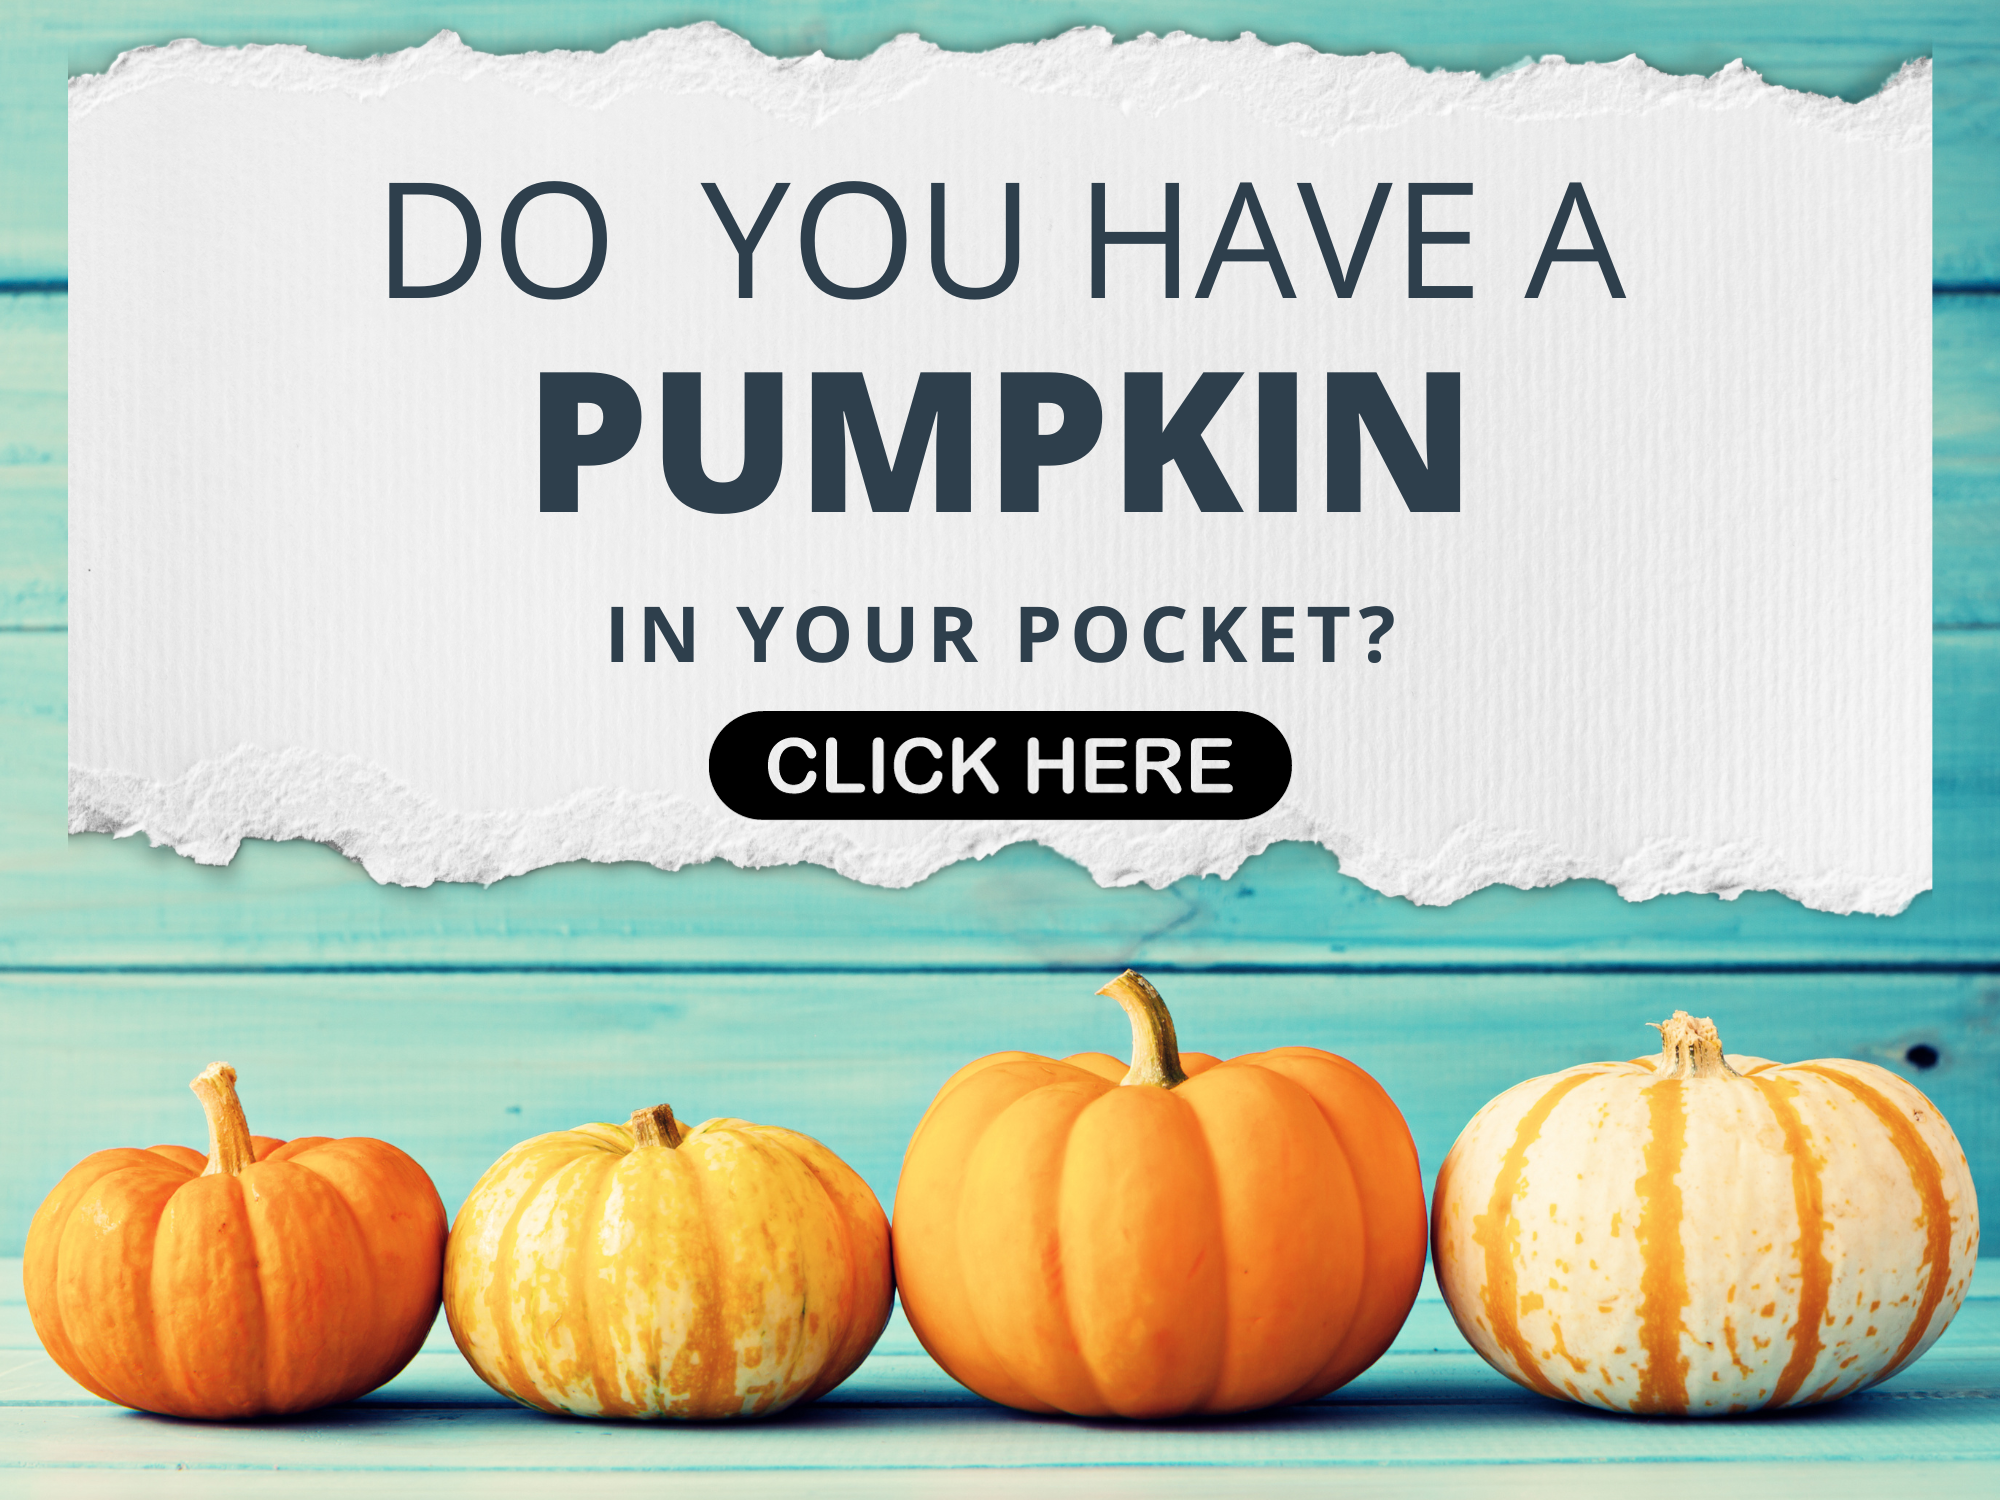 Do You have a pumpkin in your pocket